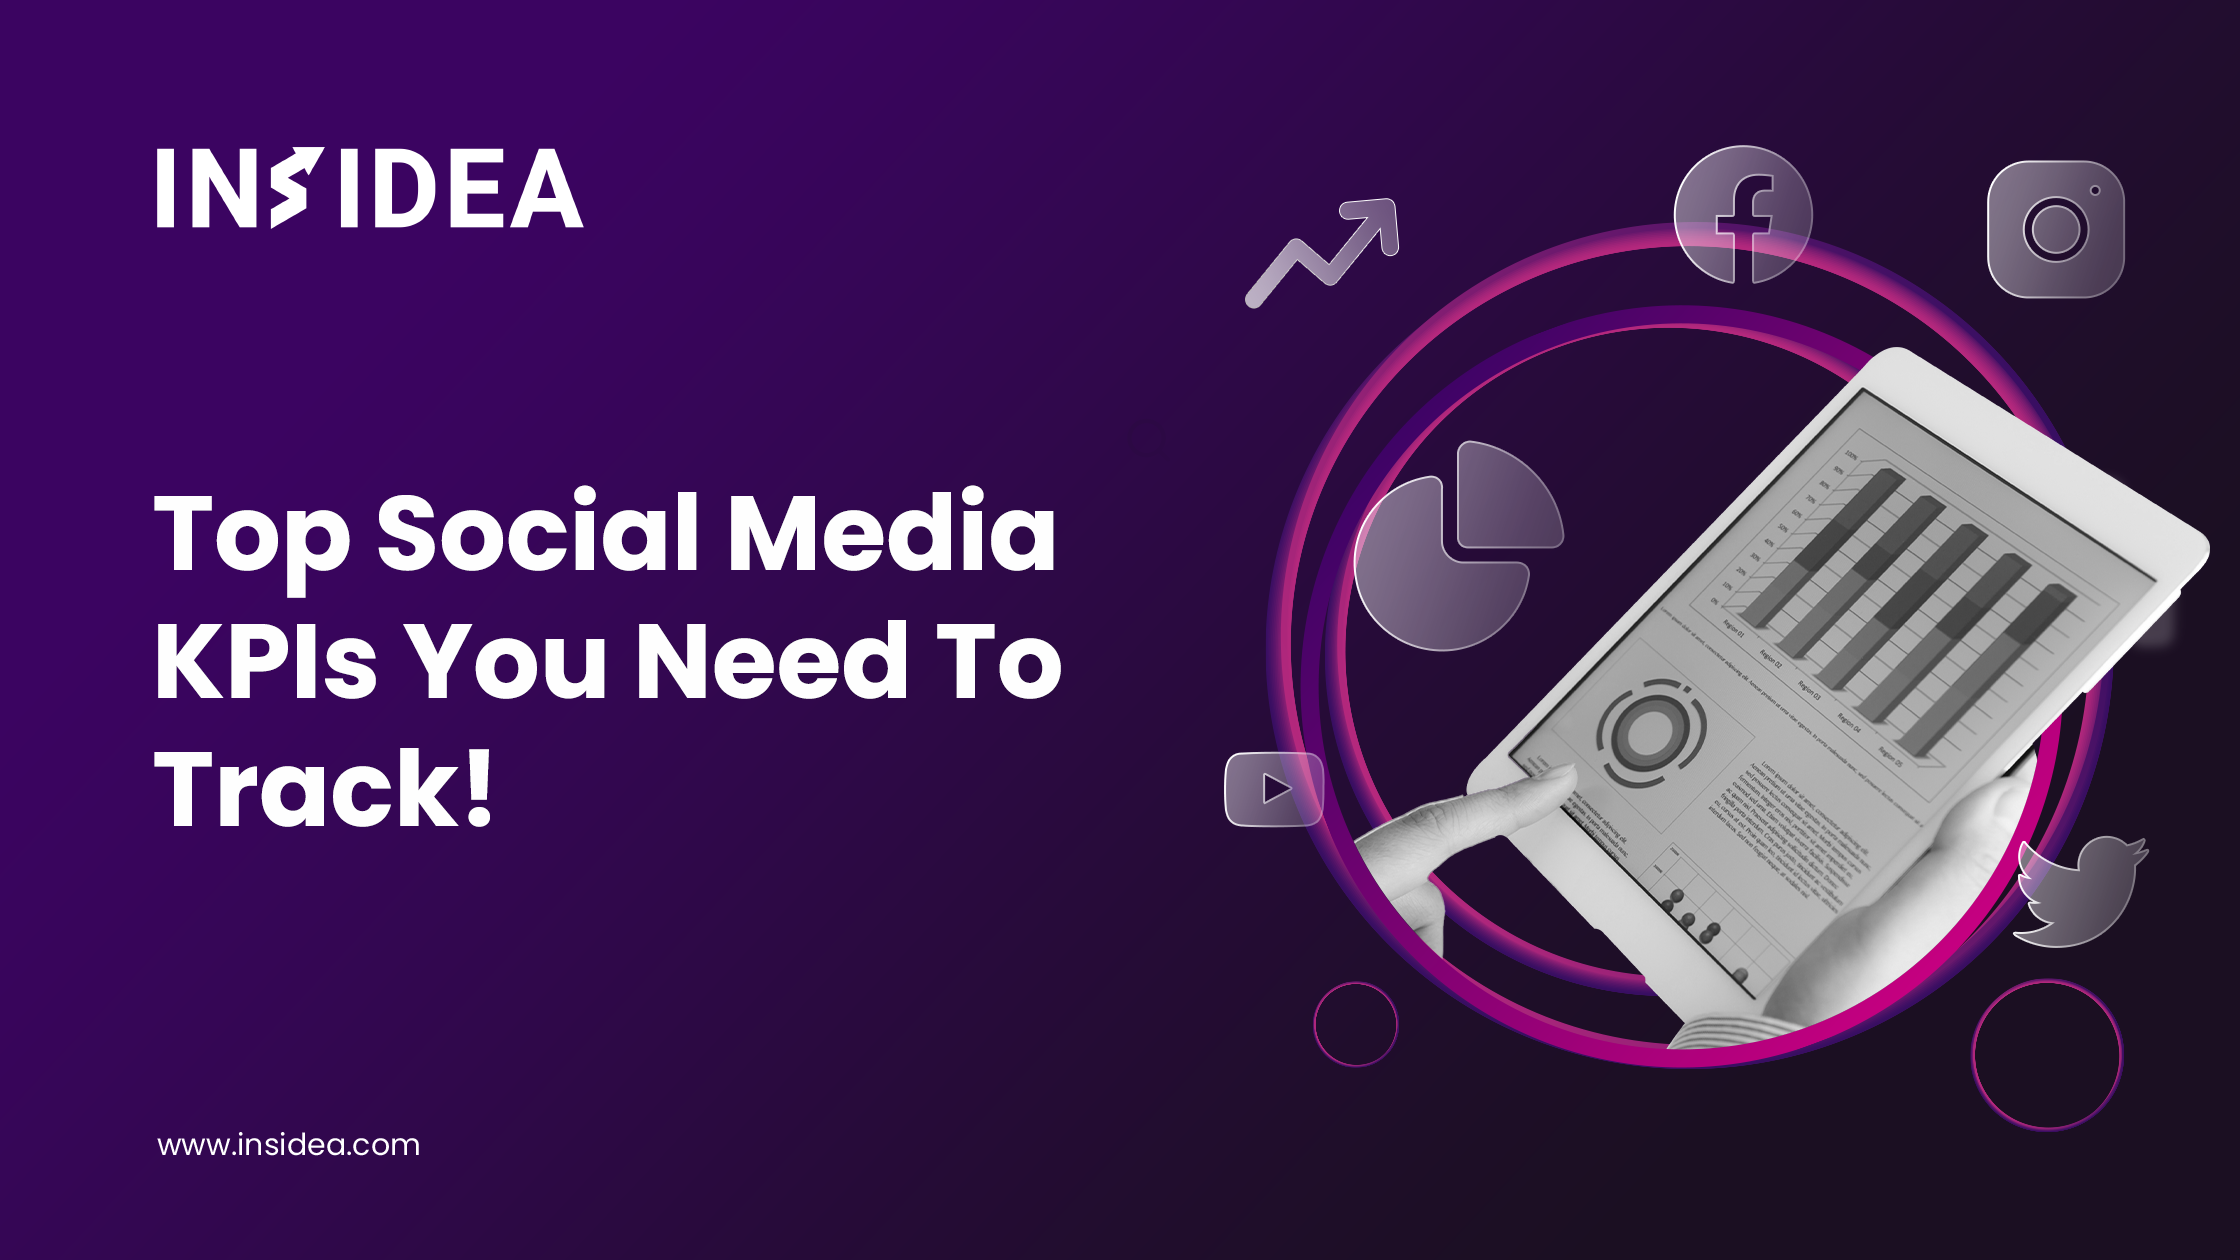 Top Social Media KPIs You Need To Track!